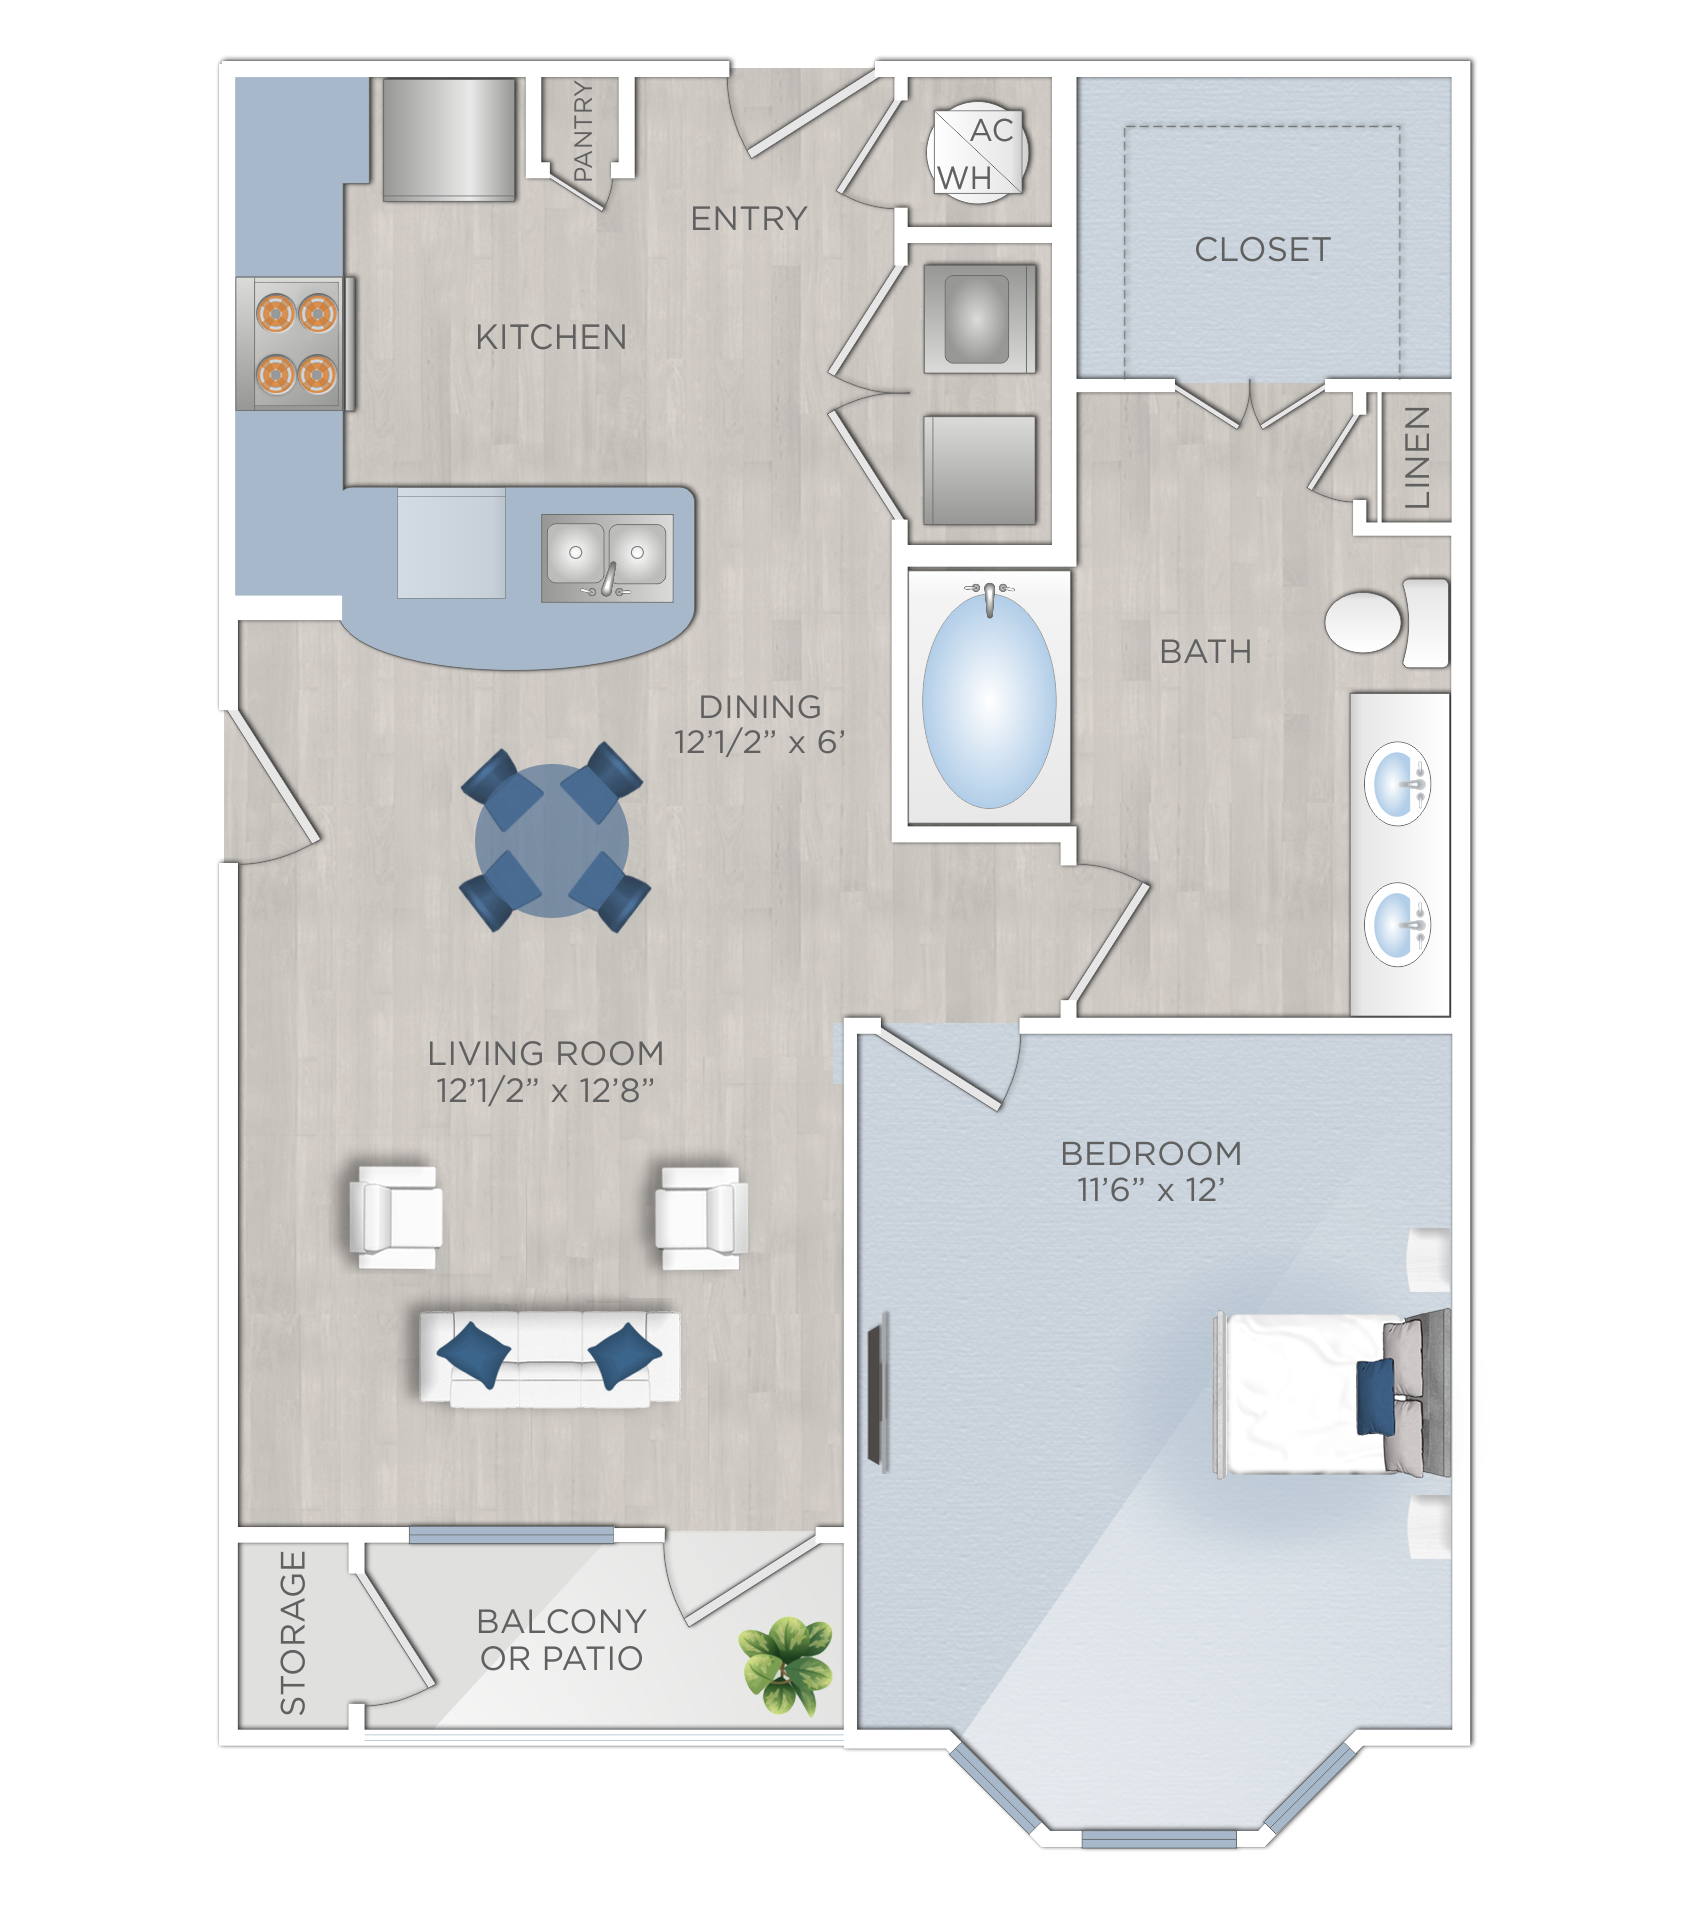 One Bedroom Apartments in Tomball, TX - The Preserve at Spring Creek - A2